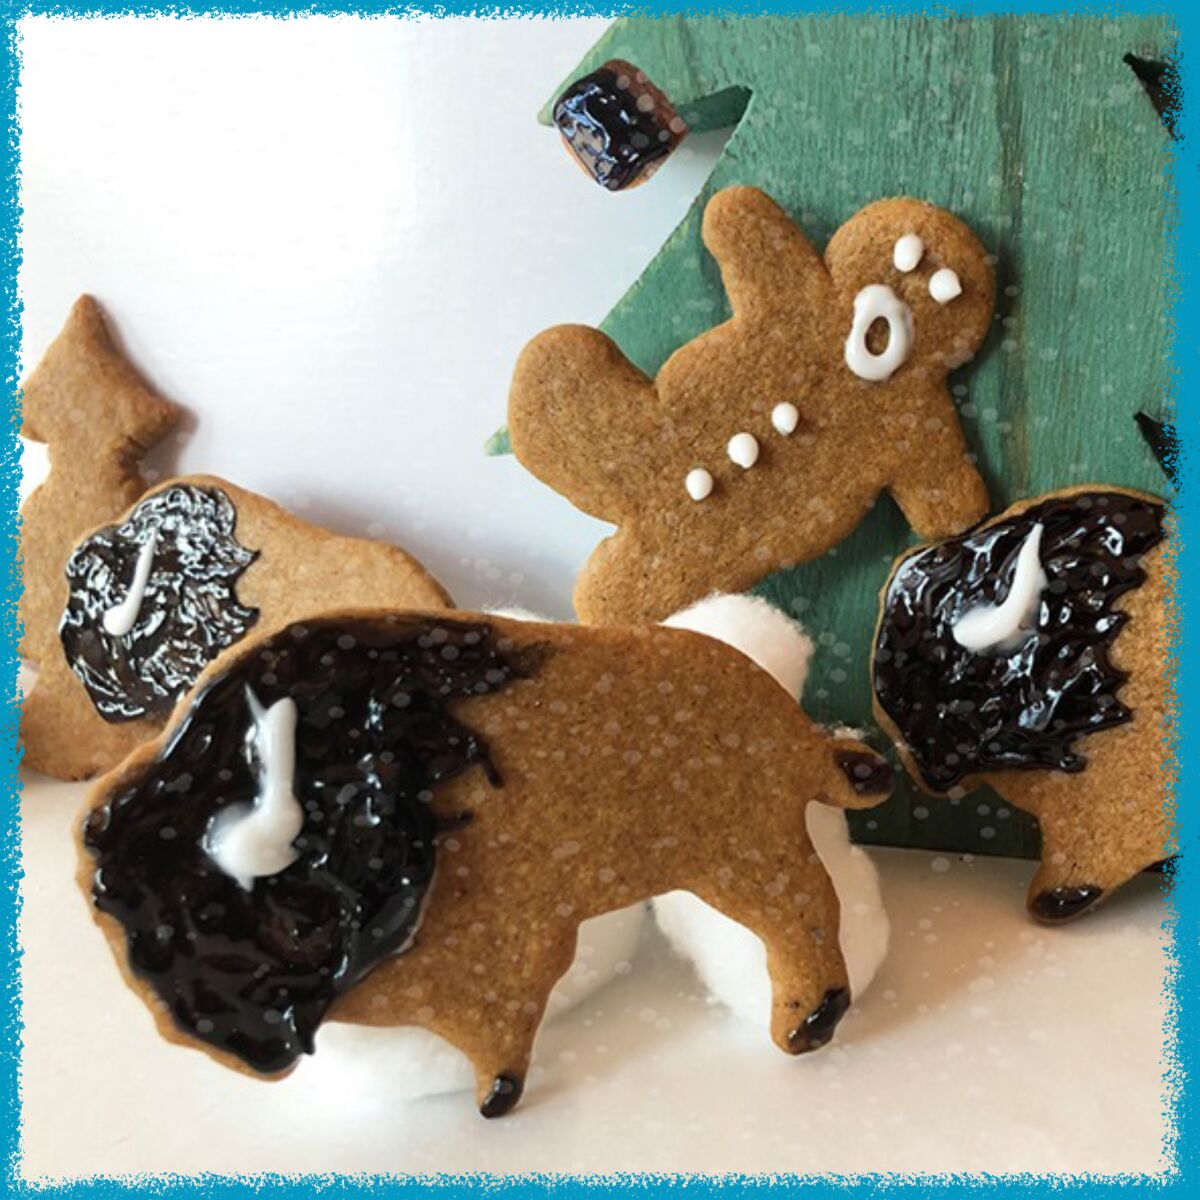 Gingerbread cookies resembling a bison charging a gingerbread man.